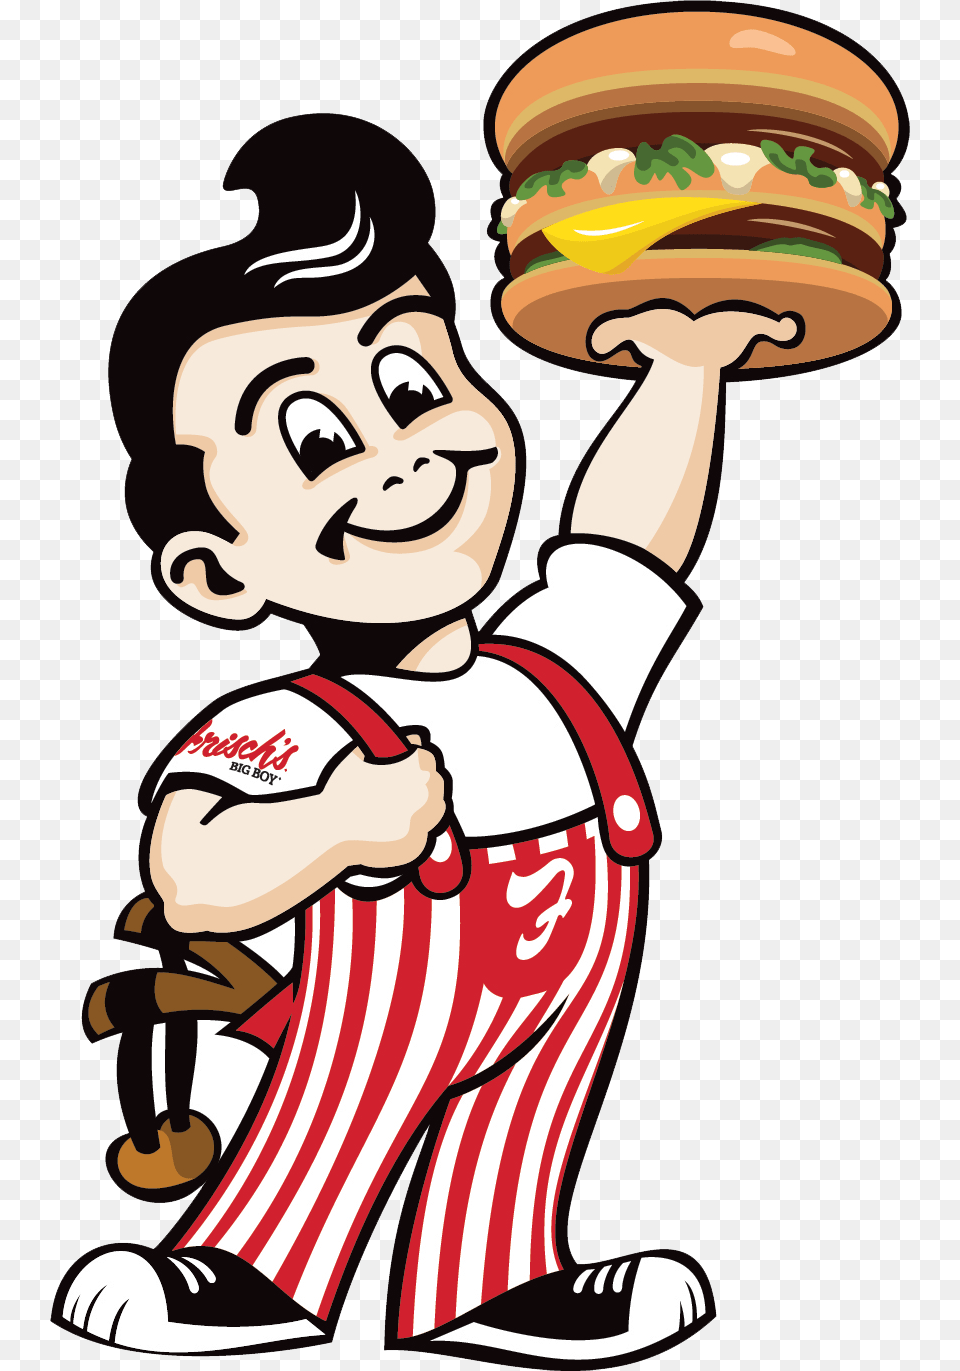 The Cincy Shirts Podcast Episode Frisch39s Big Boy, Baby, Person, Face, Head Png Image